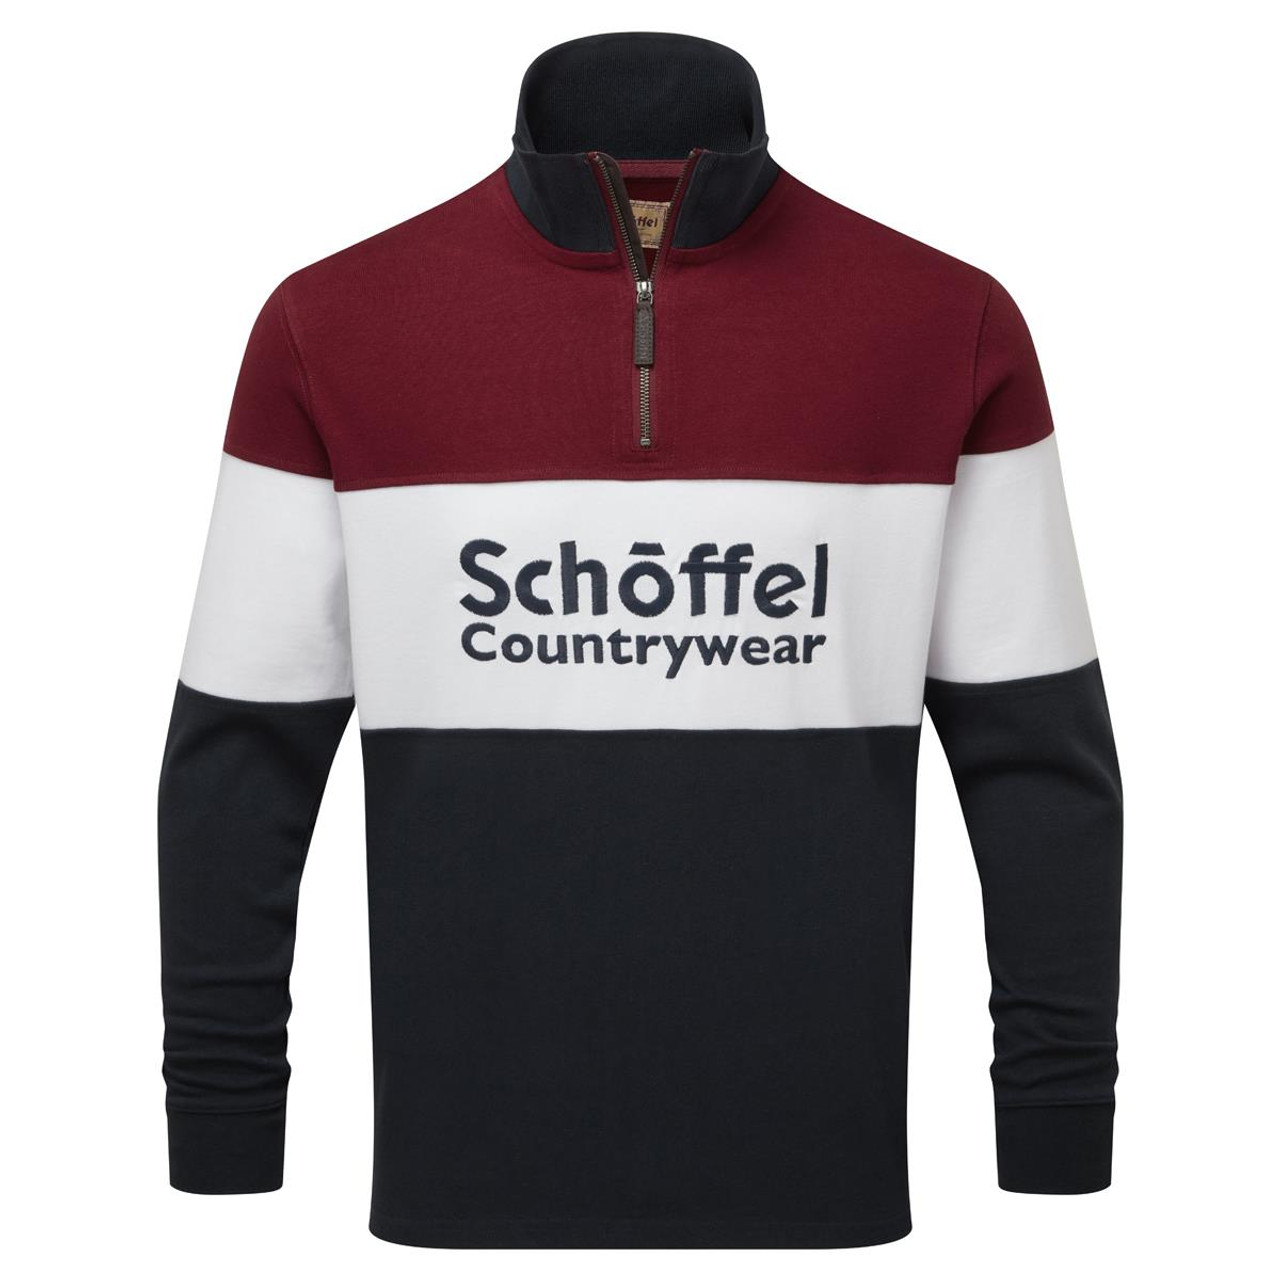 What sets apart the Schoffel Exeter Heritage 1/4 Zip?